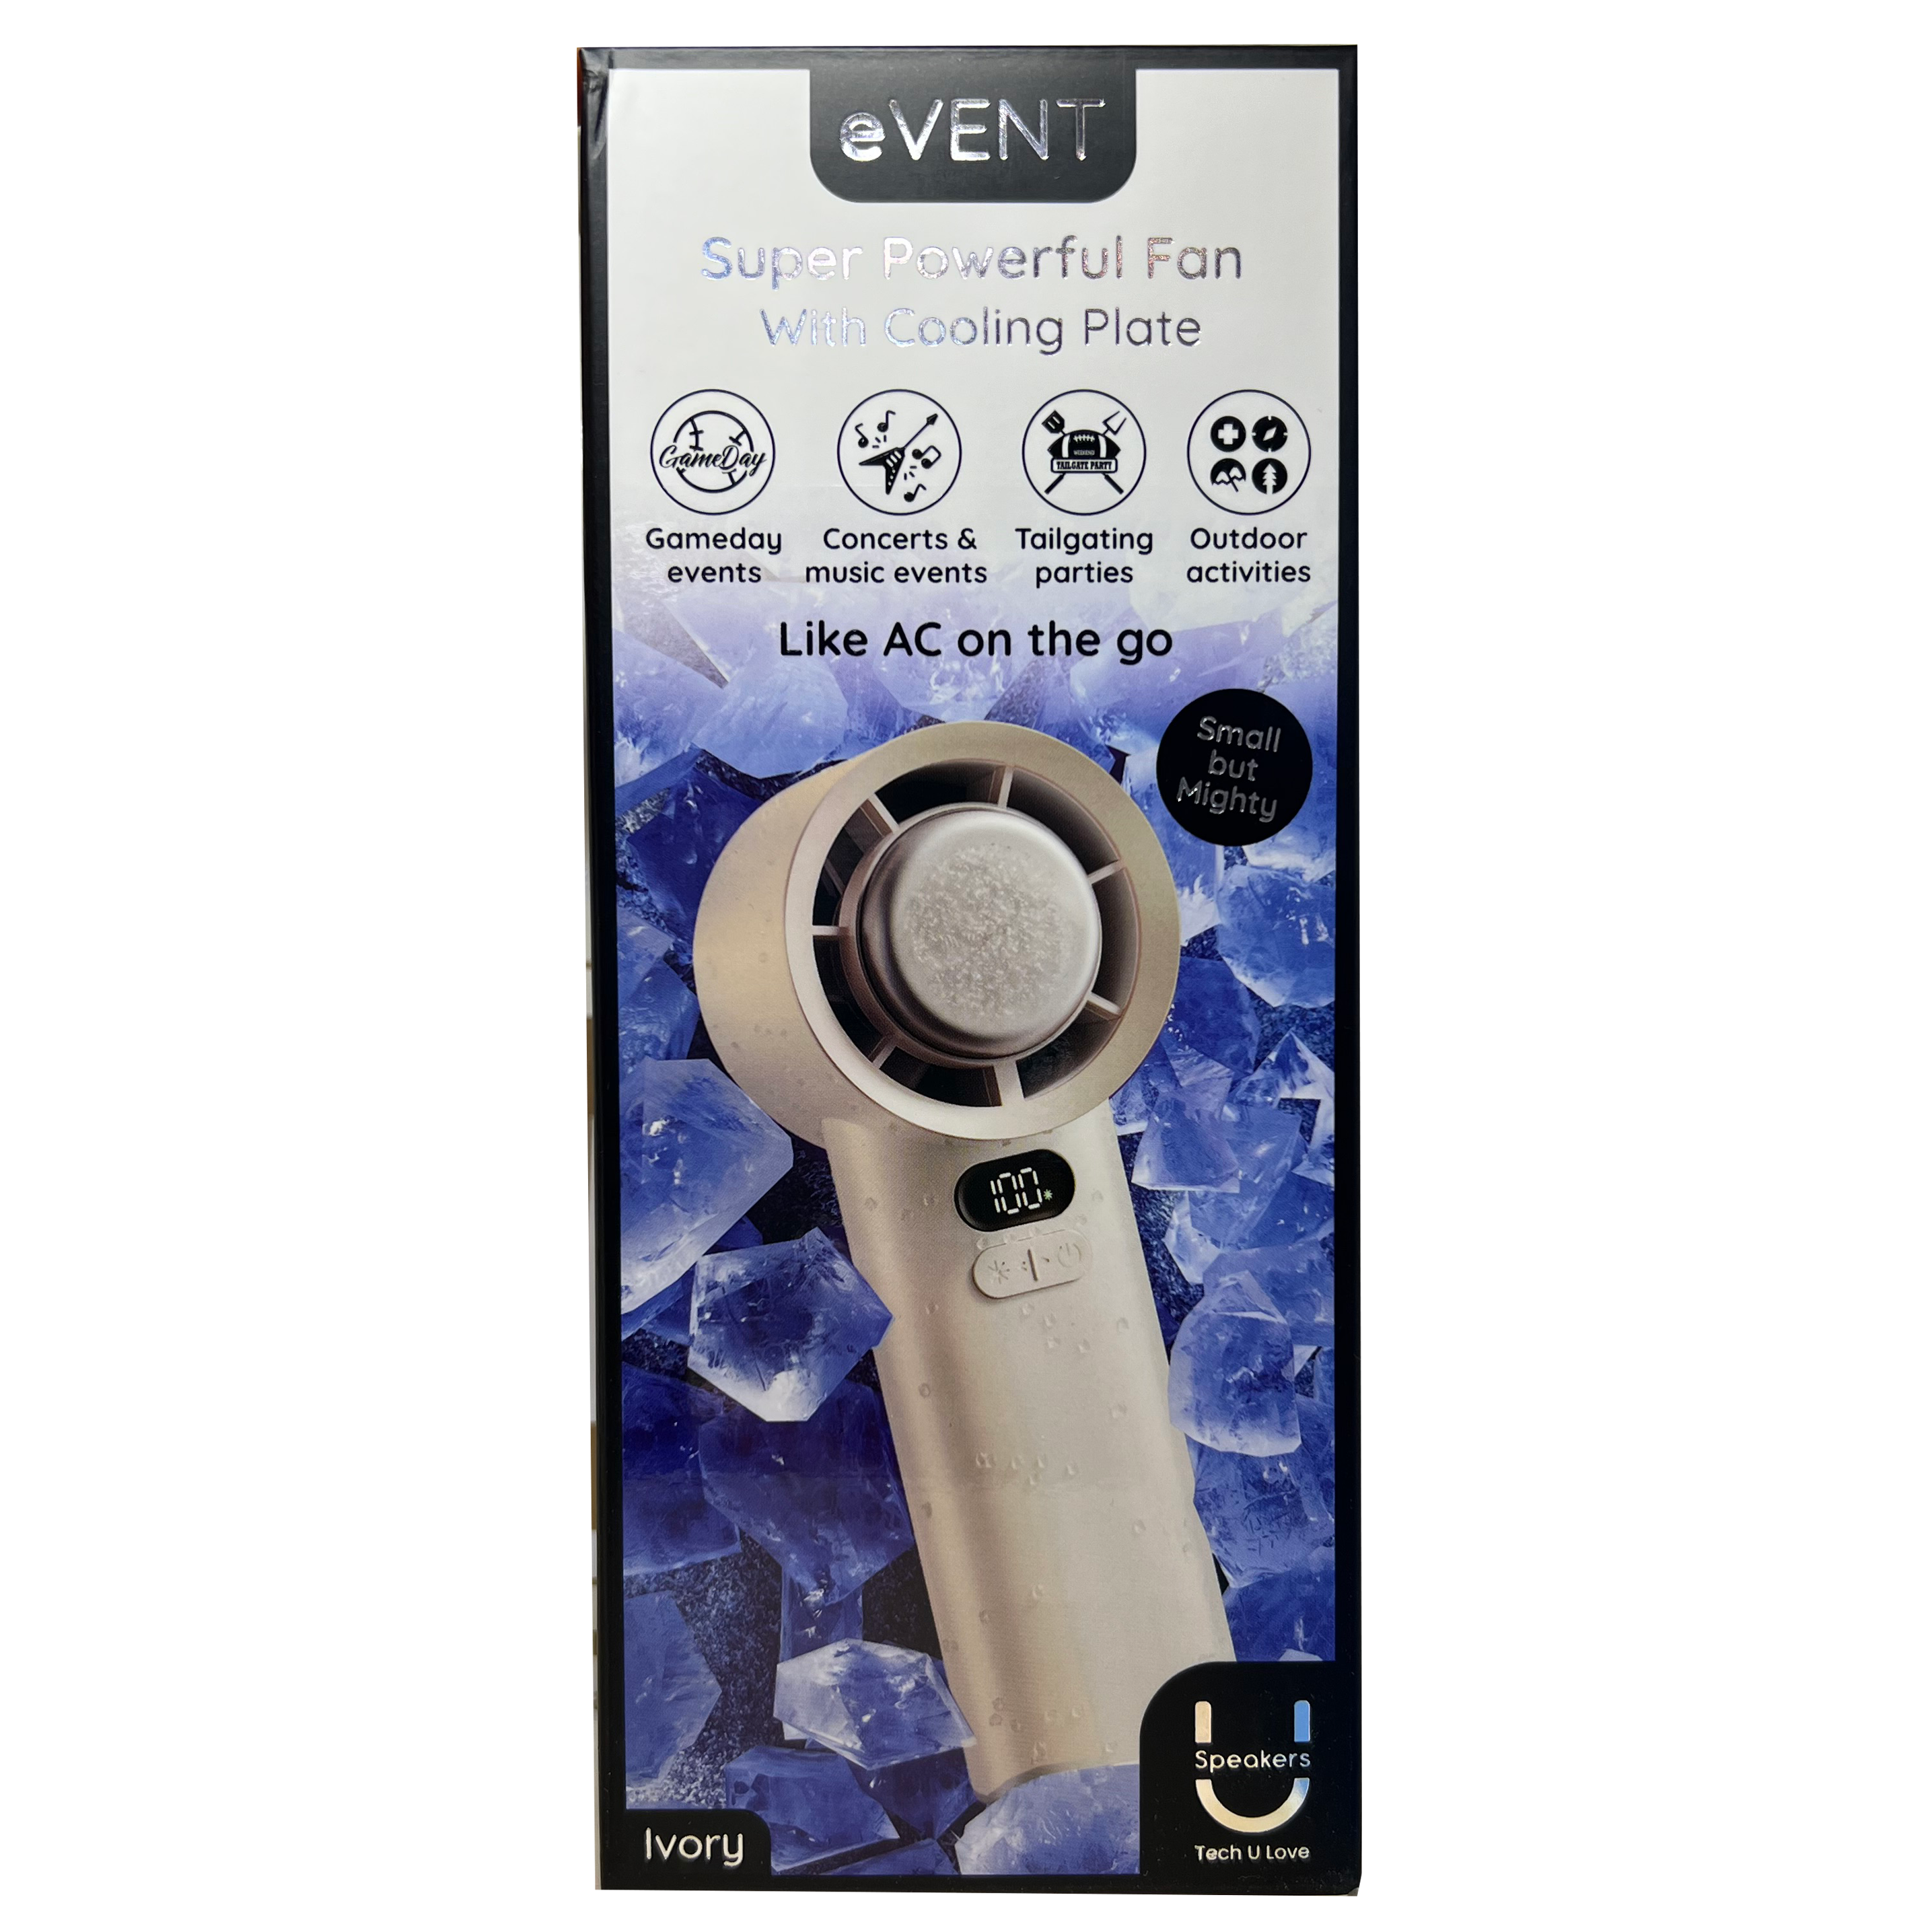 Fashionit eVENT Super Powerful Hand Held Fan With Cooling Plate – Ivory